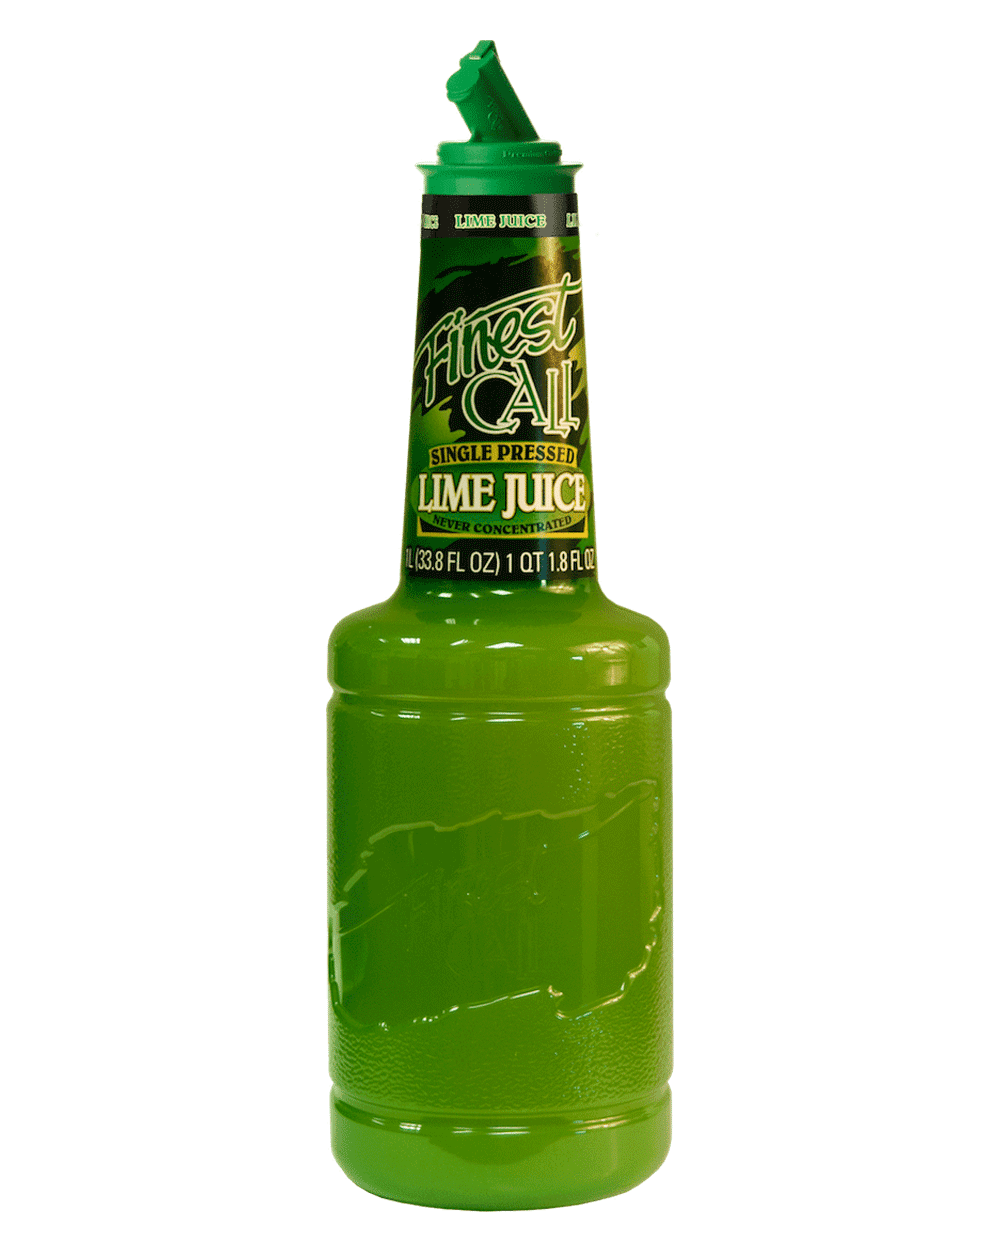 Finest-Call-Pressed-Lime-Juice